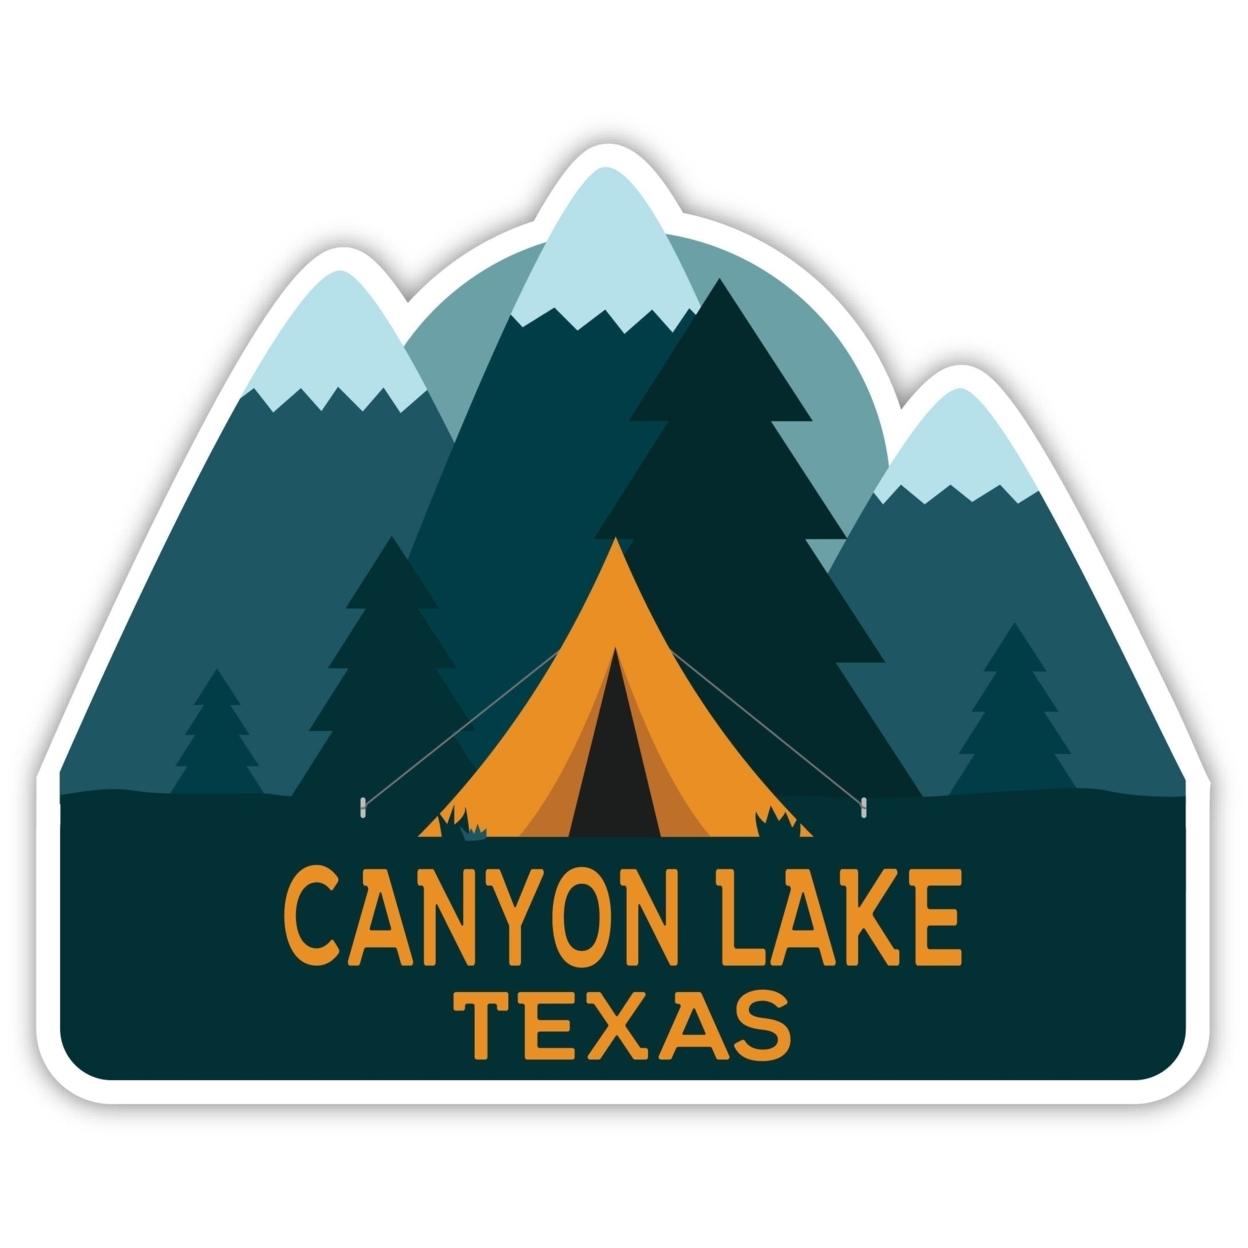 Canyon Lake Texas Souvenir Decorative Stickers (Choose Theme And Size) - 4-Pack, 10-Inch, Adventures Awaits